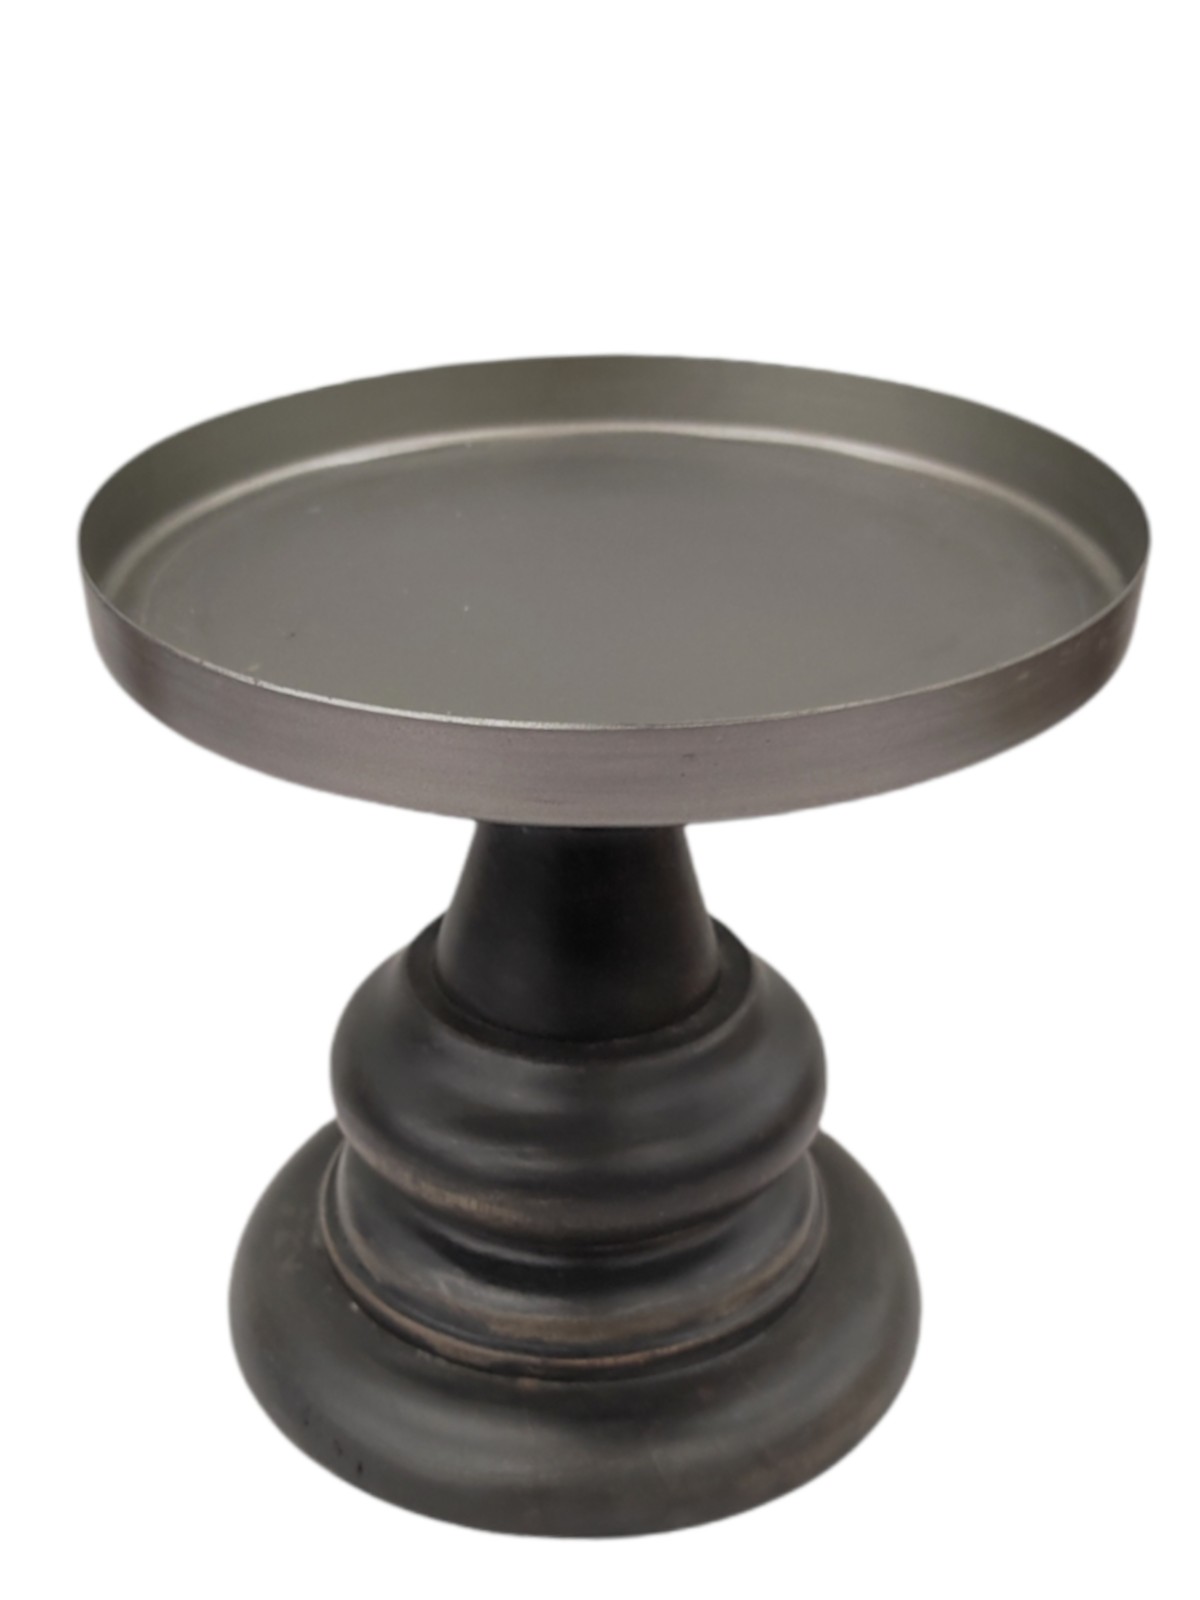 Metal candlestick with wooden base